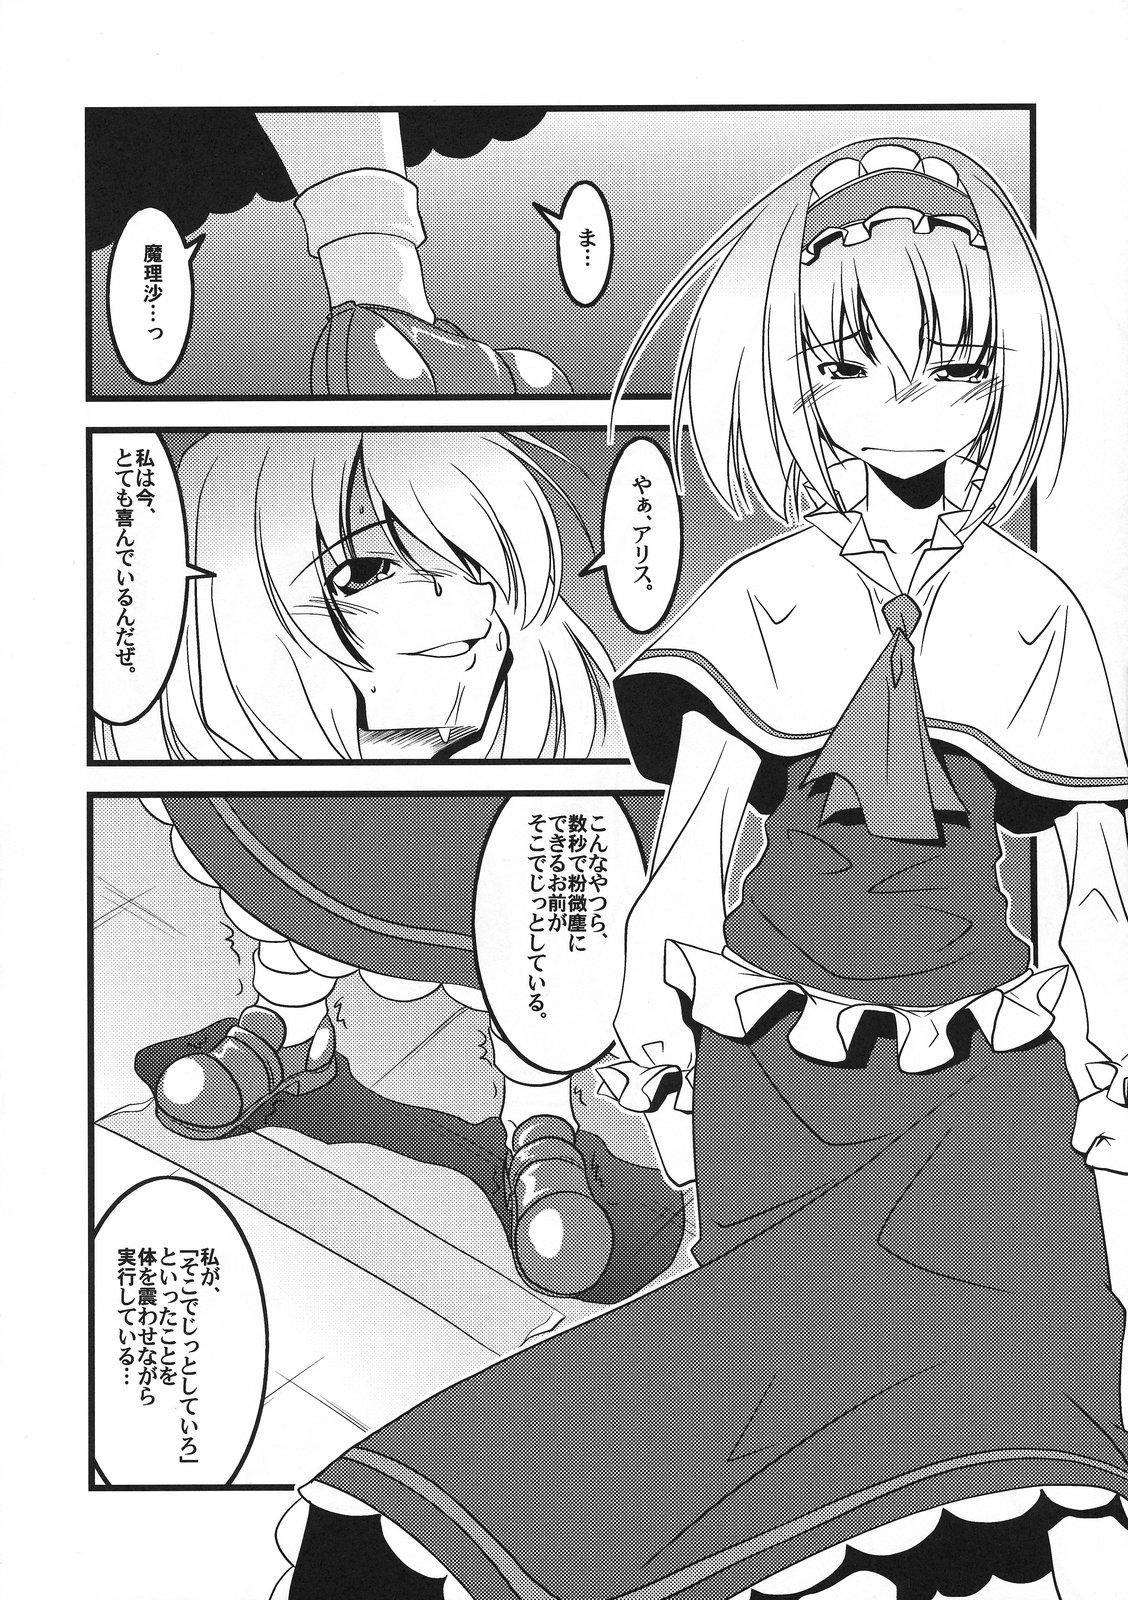 Pussylicking 恋虐／虐恋 - Touhou project Ride - Page 6